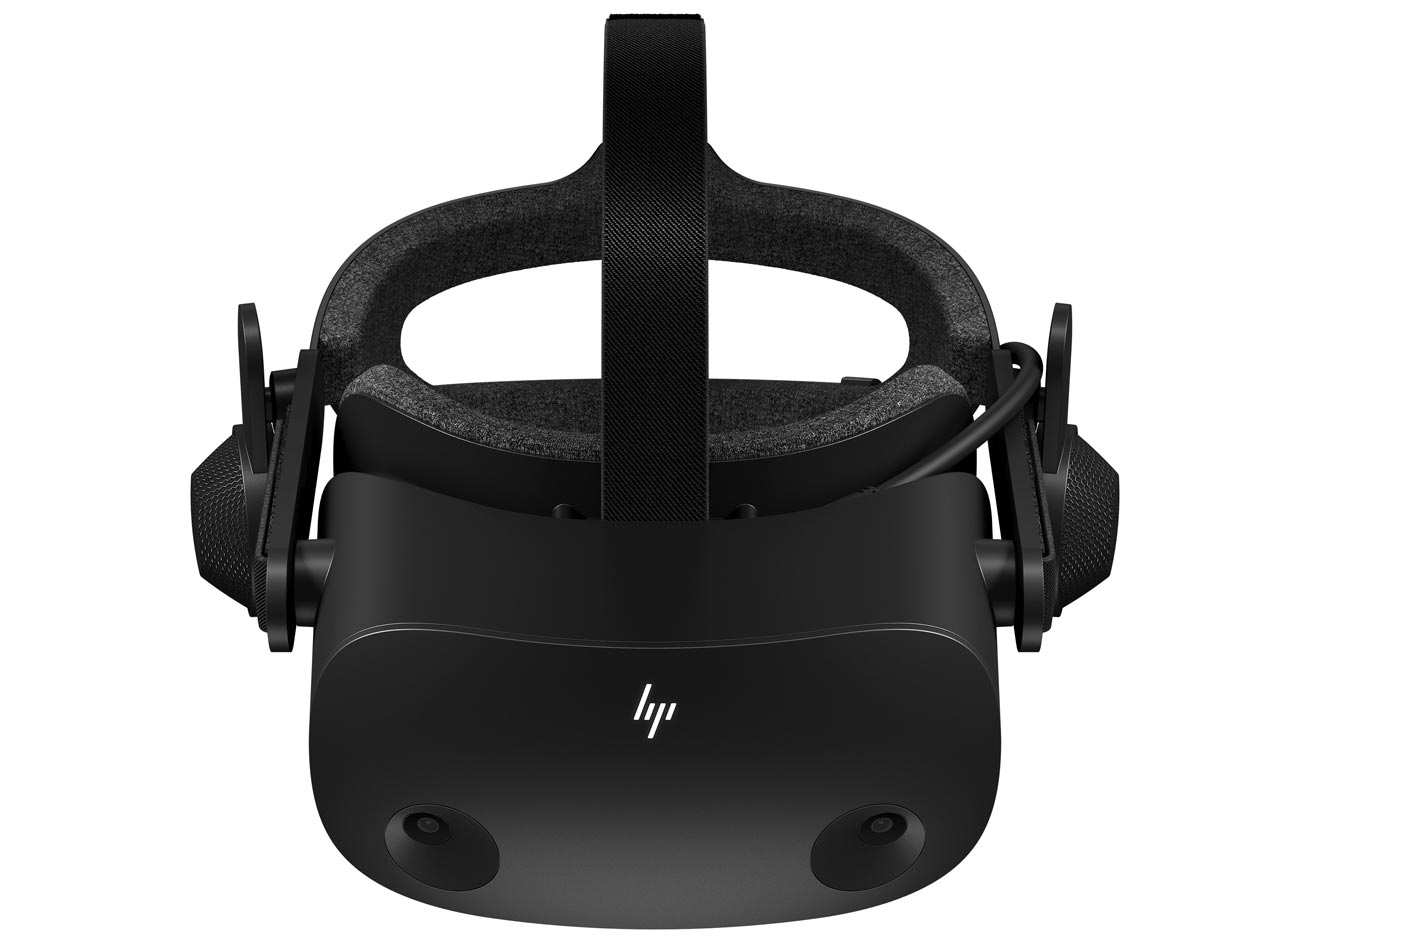 HP Reverb G2: a great Virtual Reality headset… when it works by Jose  Antunes - ProVideo Coalition